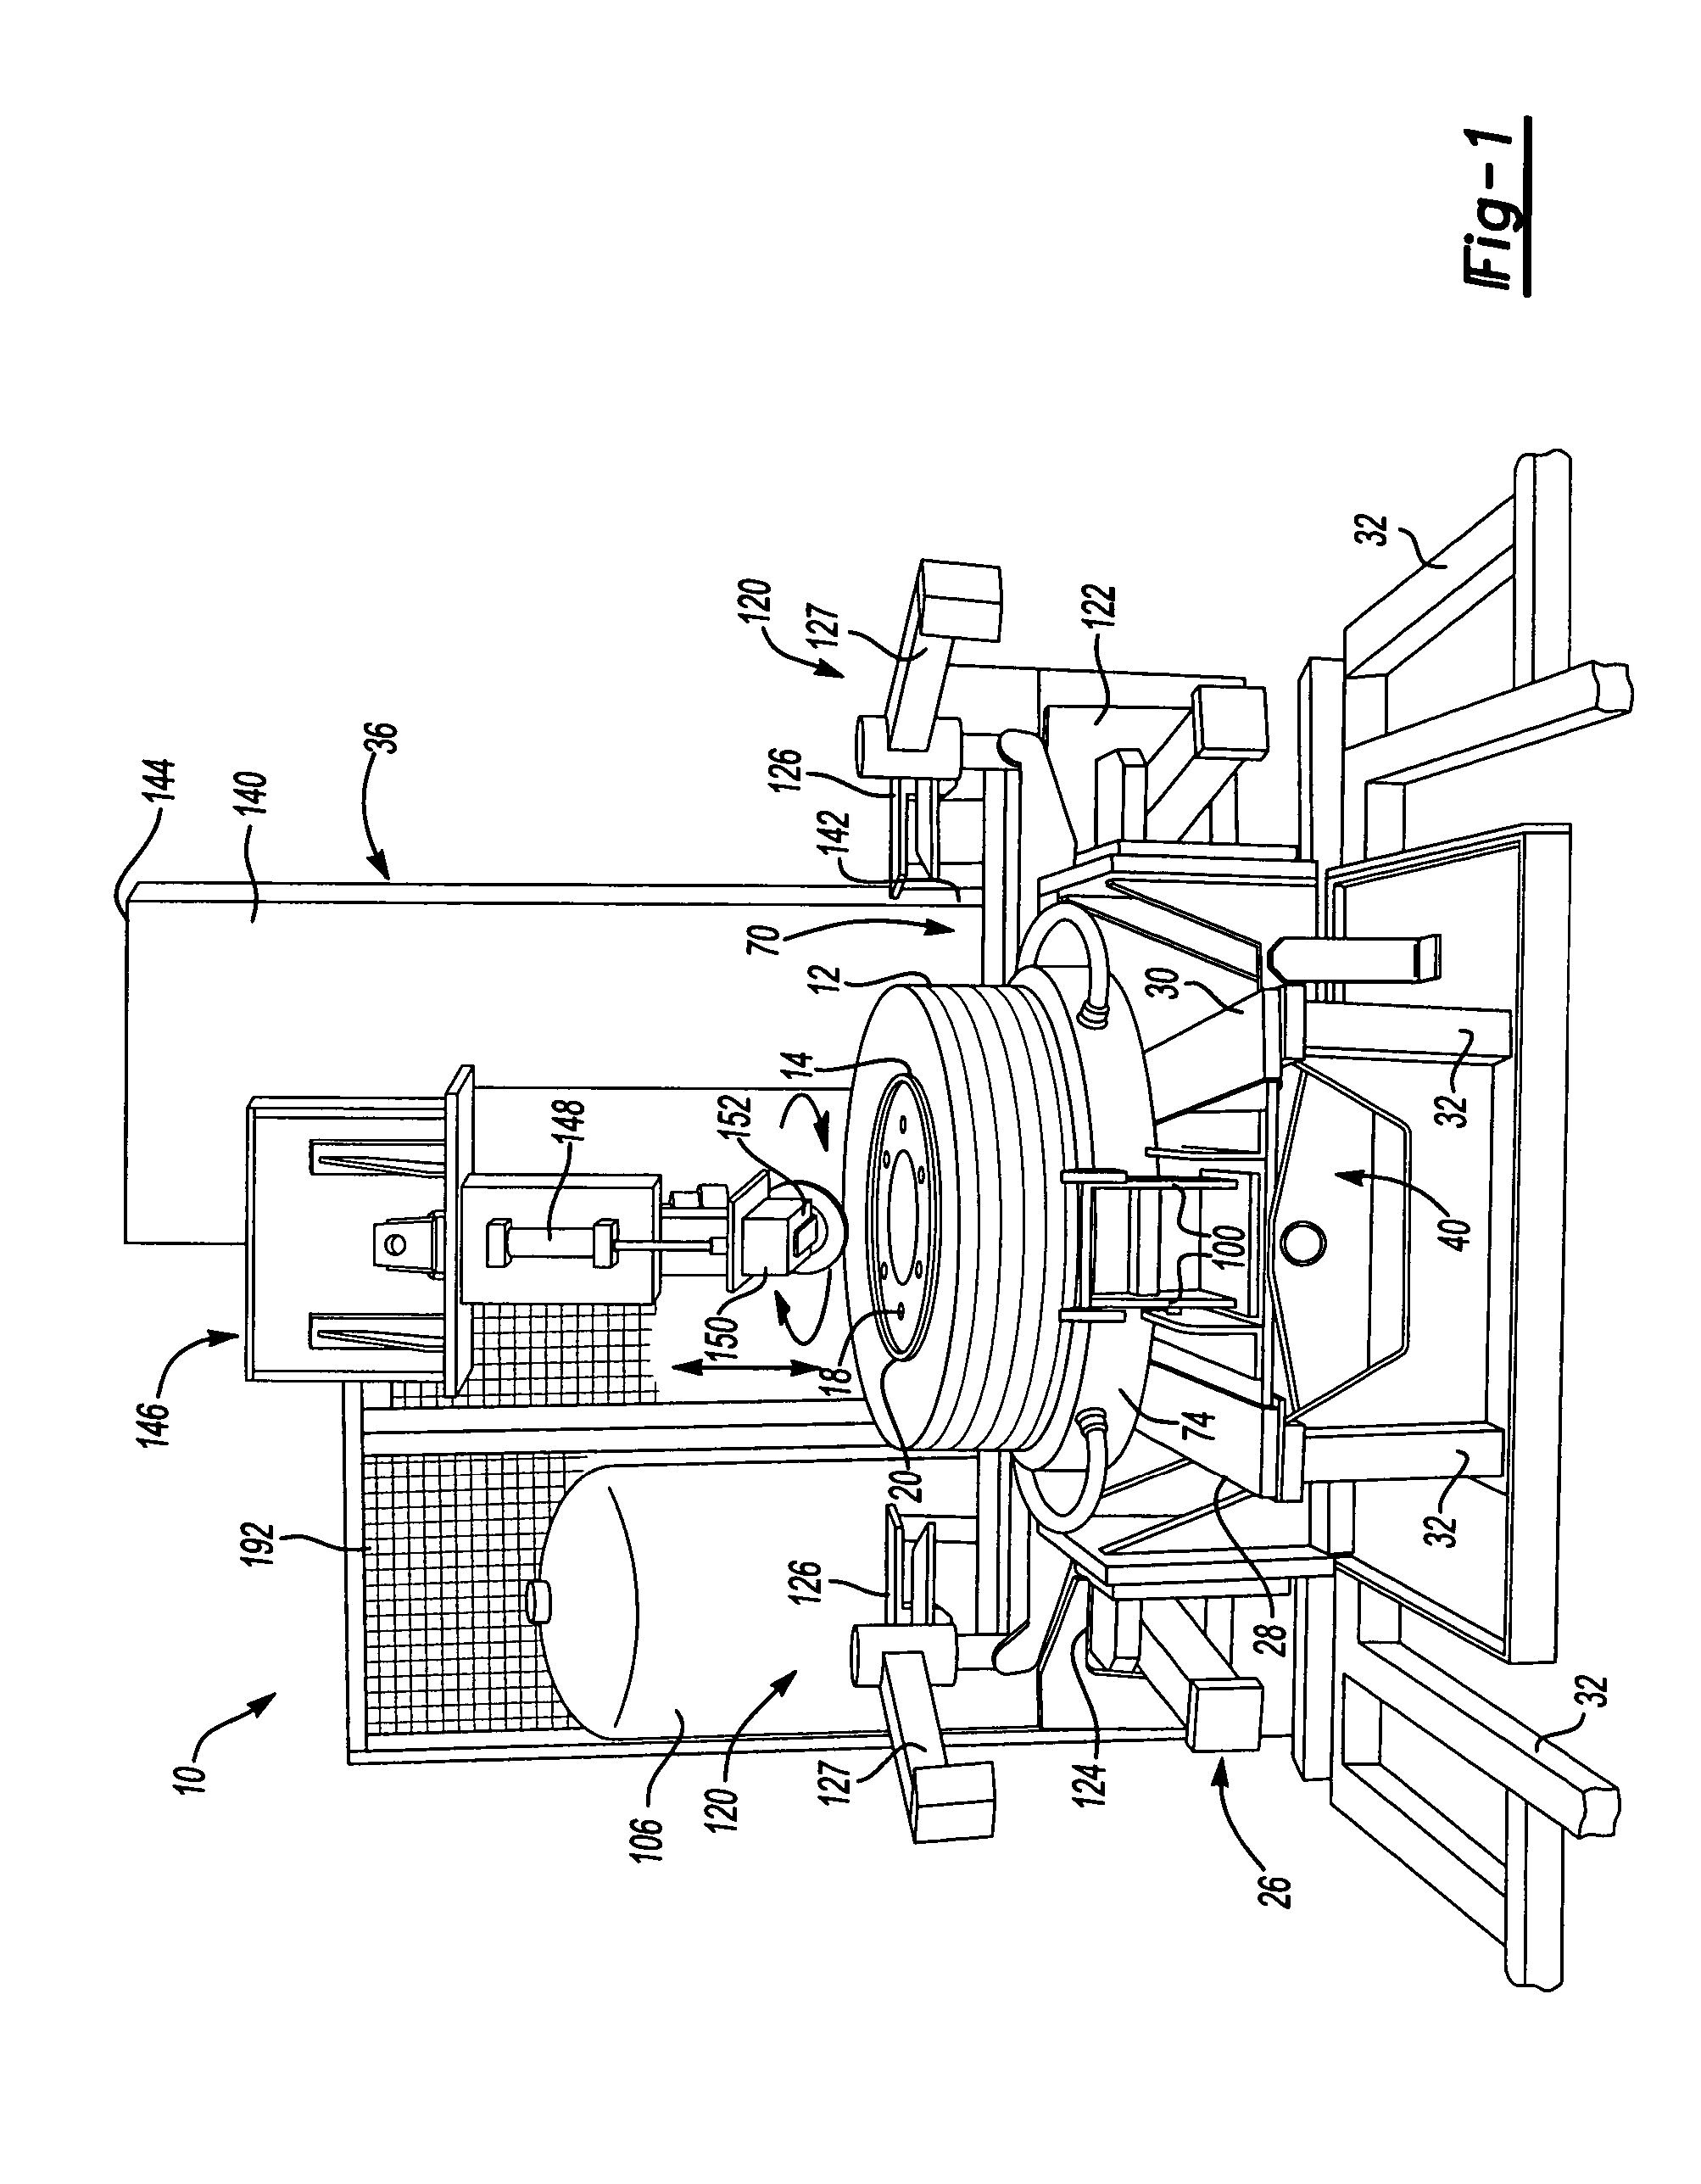 Apparatus for mounting and inflating a tire and wheel assembly